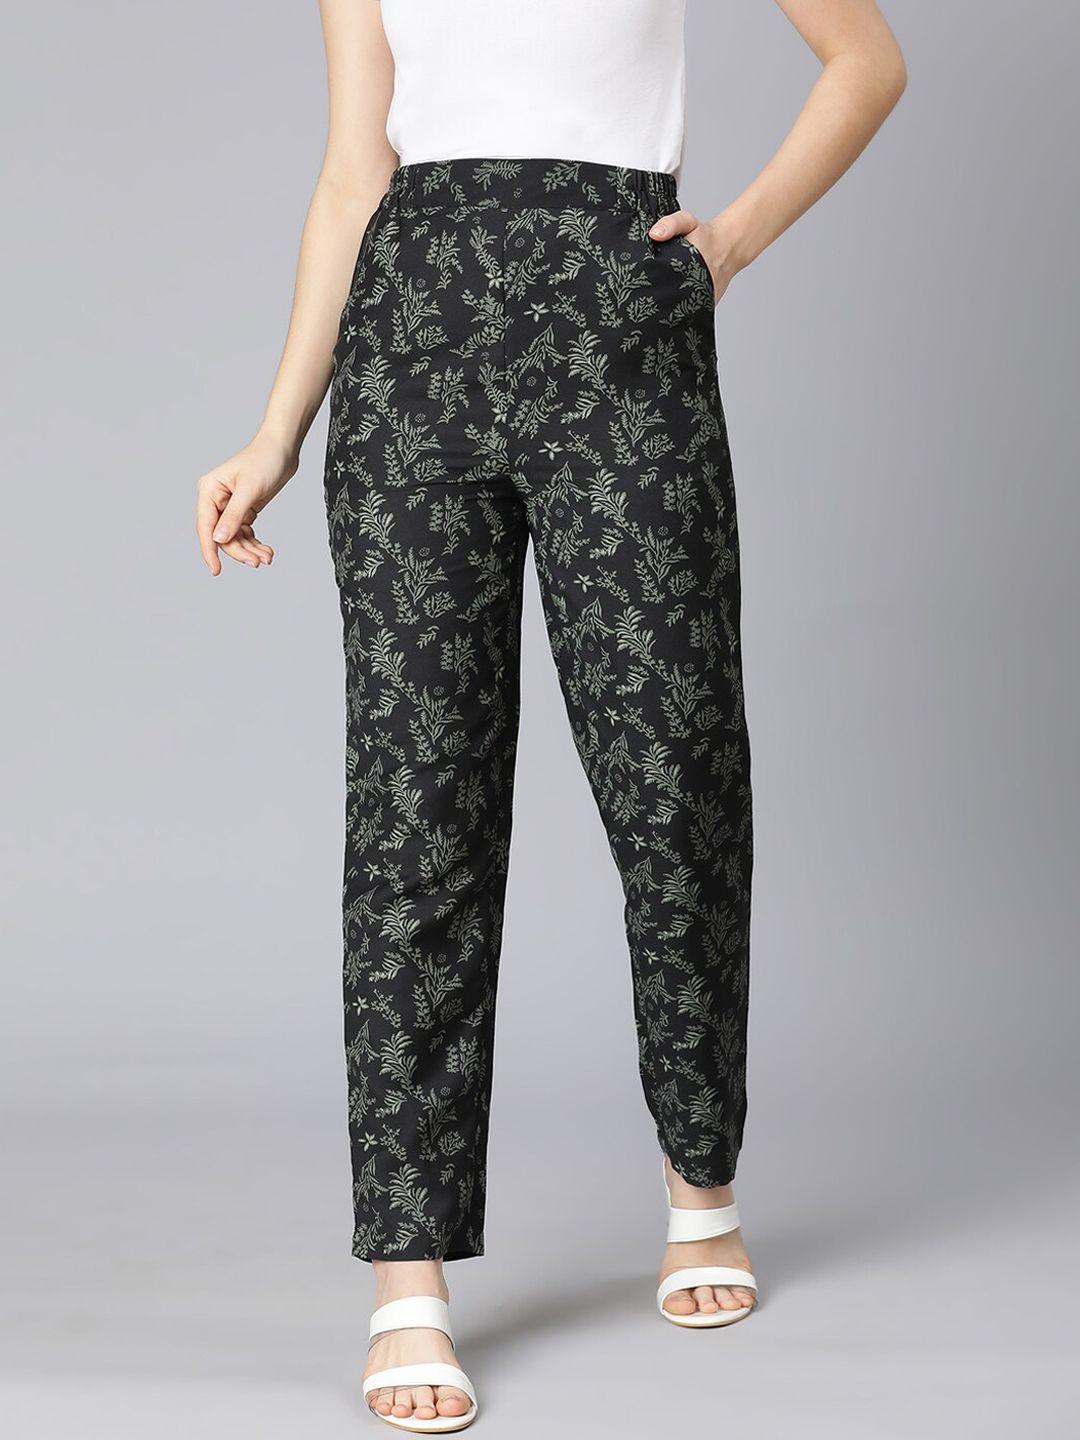 oxolloxo women green floral printed trousers